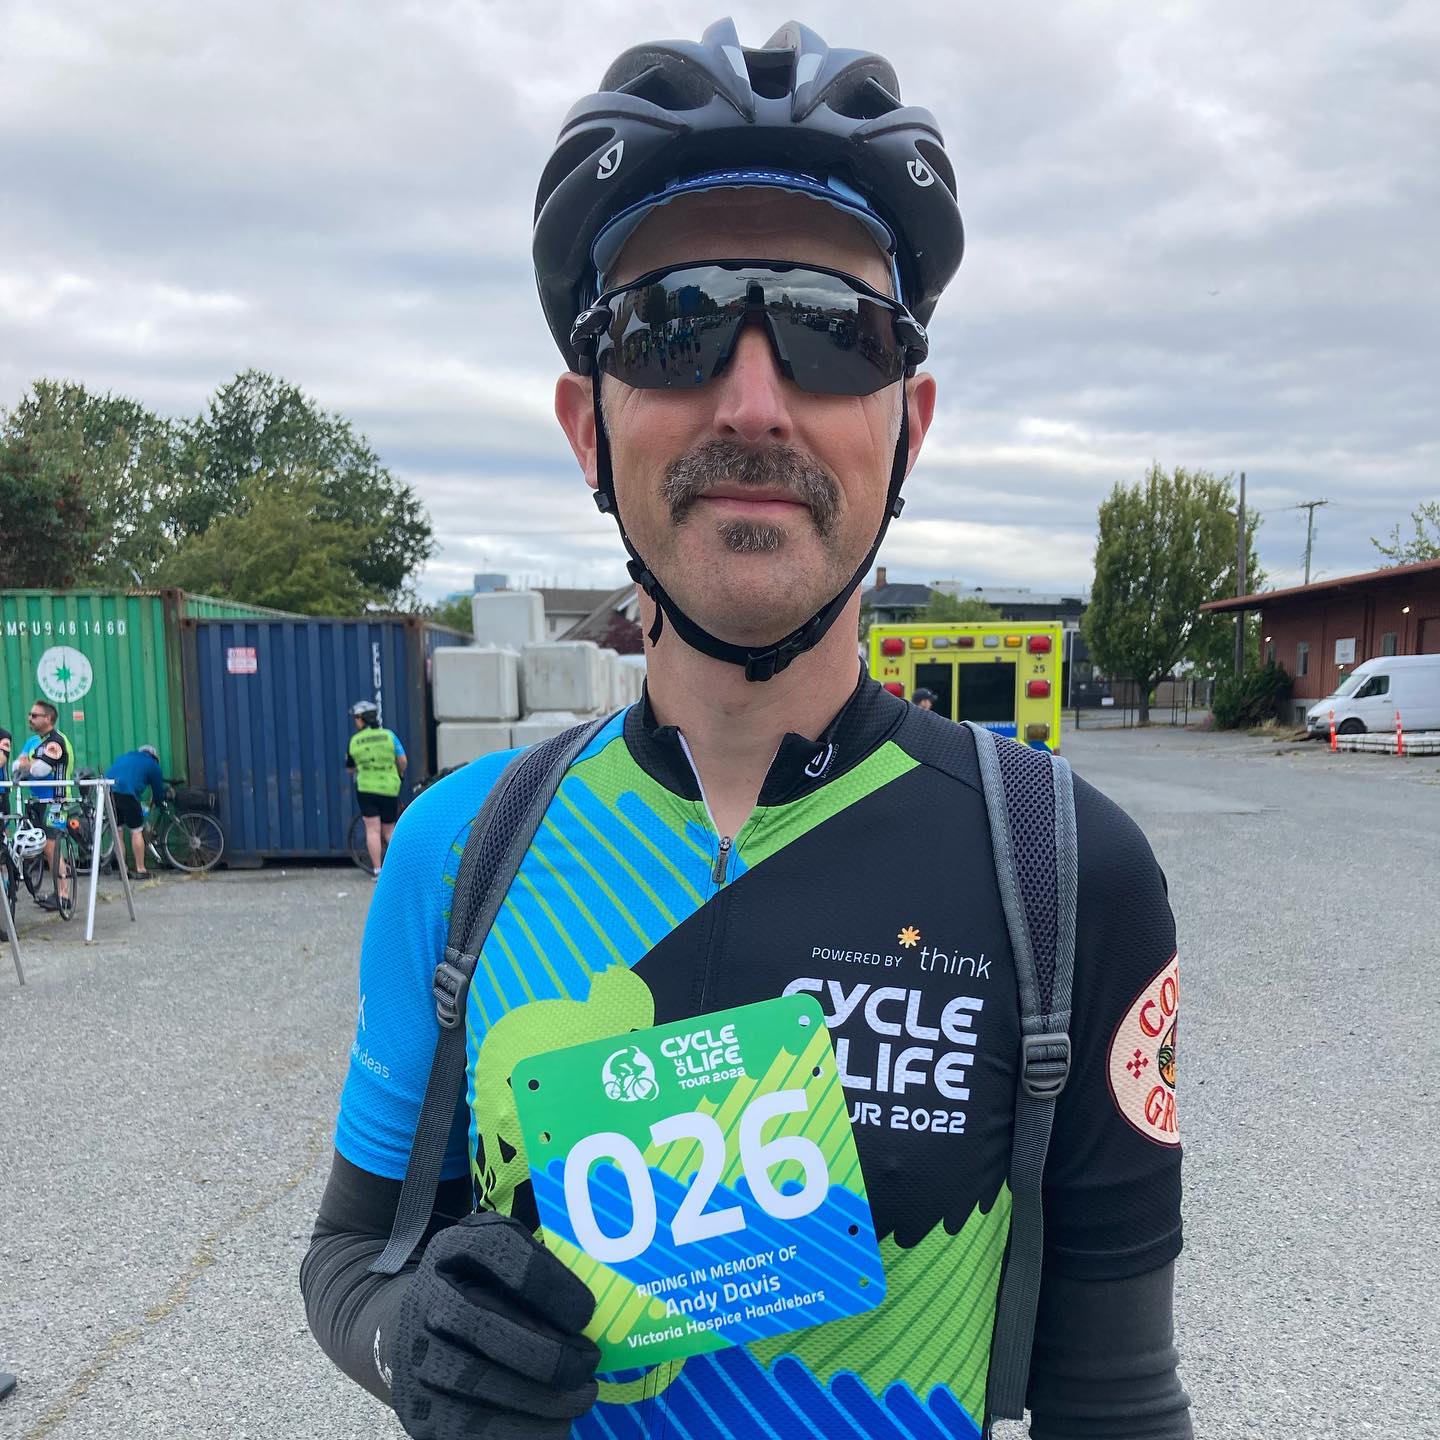 Today we ride. @cycleoflifetour starts today with about 120 km. Tomorrow more of the same. There is still time to donate to supporting hospice care on Vancouver Island. #cycling #yyj #bikesarefun #cycleoflifetour #cycleoflifetour2022